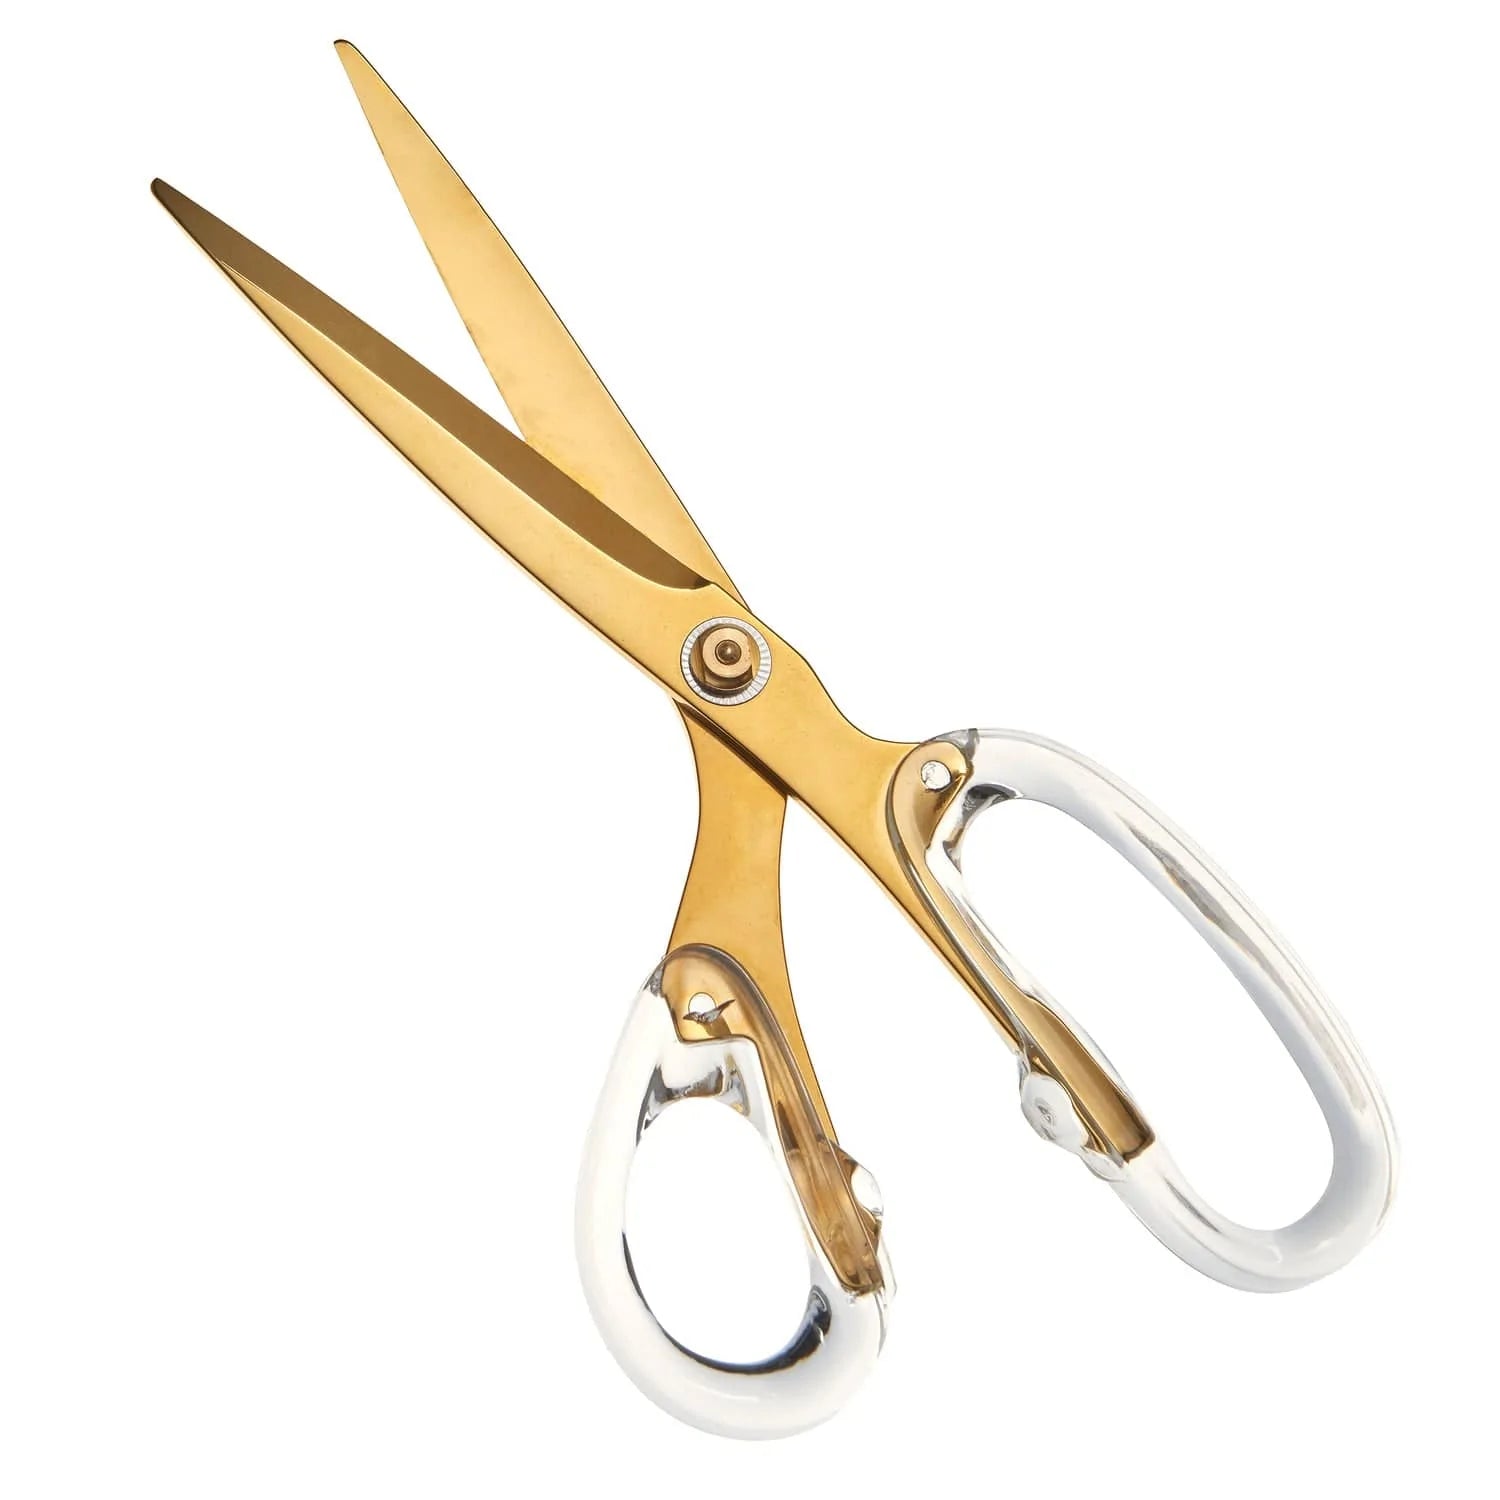 Clear Acrylic Gold Craft Scissors Straight Recycle Stainless Steel Cutting  Tool Office Desk Stationery Tailor Sewing Scissors for School N Home (Clear